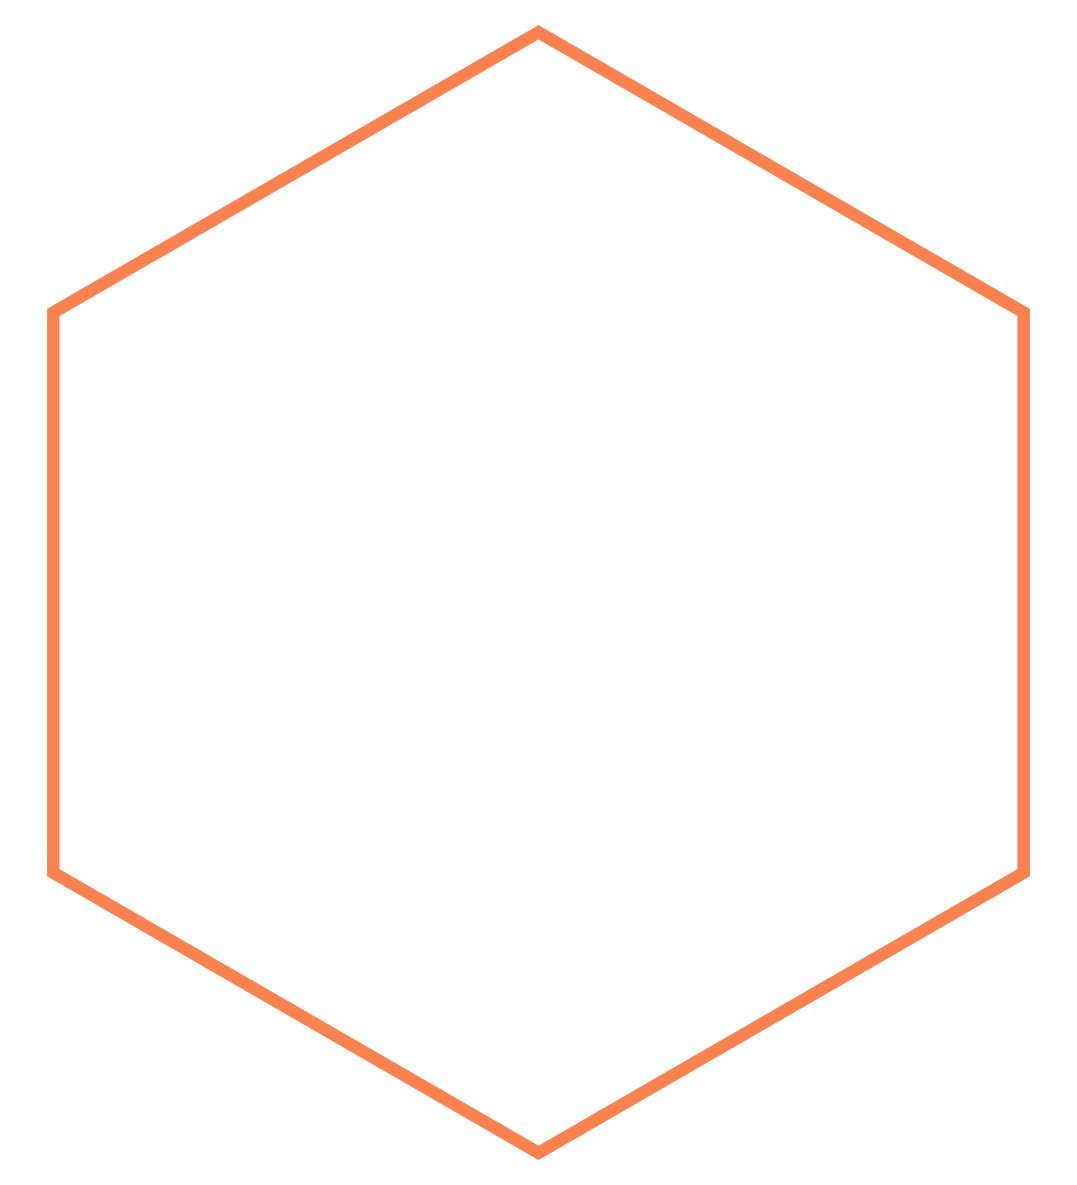 Applying relevant industry standards, methodologies and frameworks, our team conducts rapid analysis, assessment, and evaluation of emerging or extant capabilities.